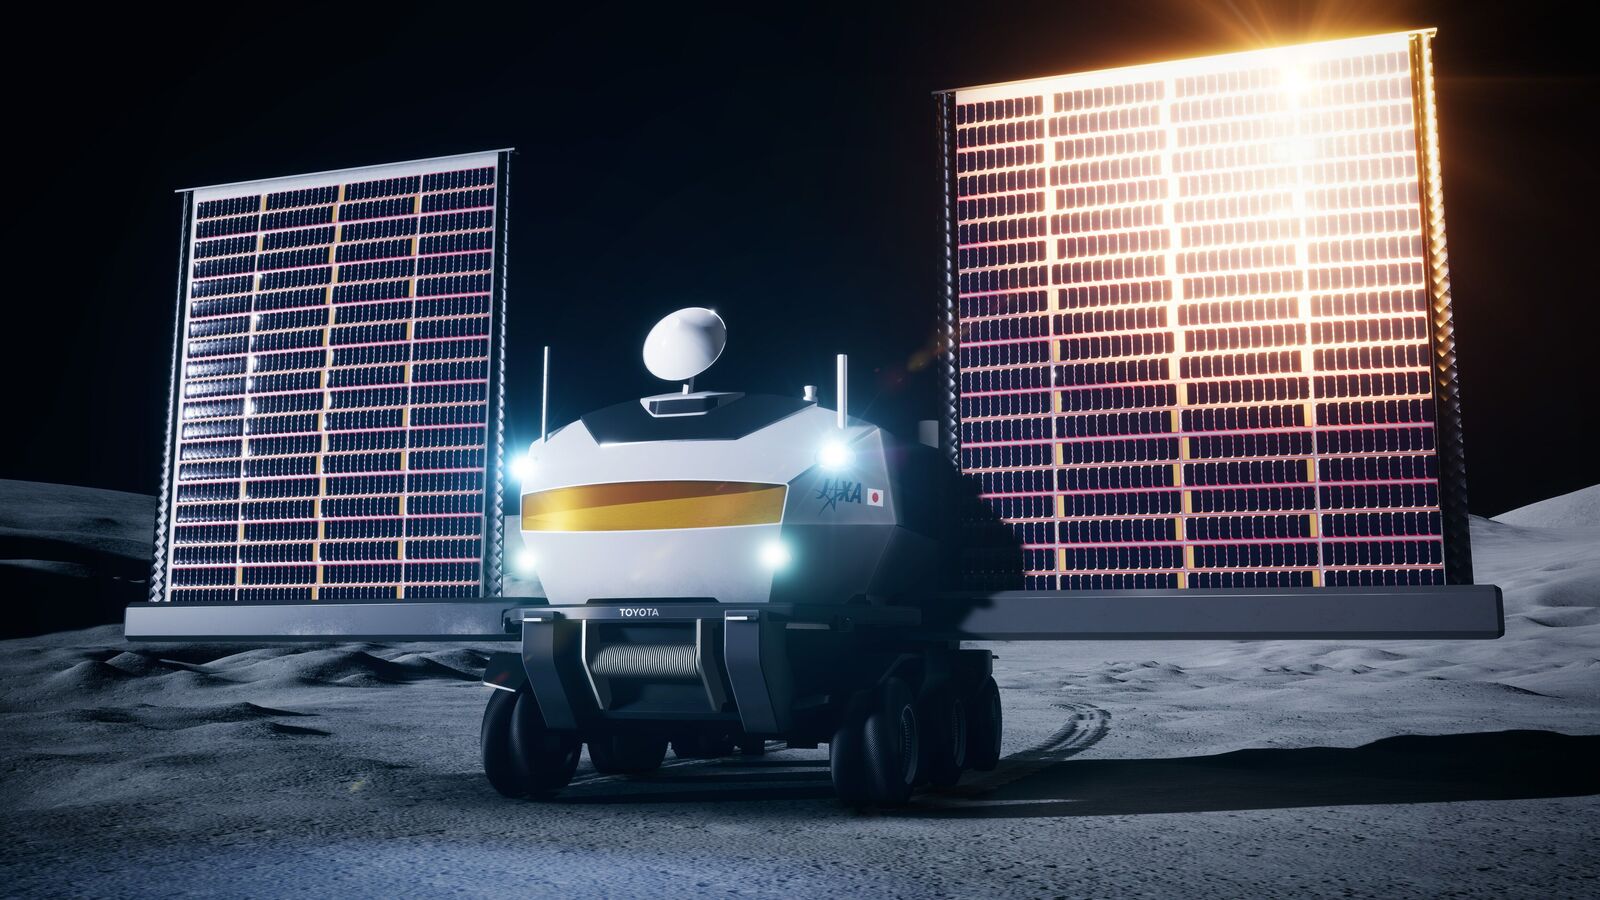 From Earth's rocks to lunar rovers: Toyota's Moon mission with the Lunar Cruiser